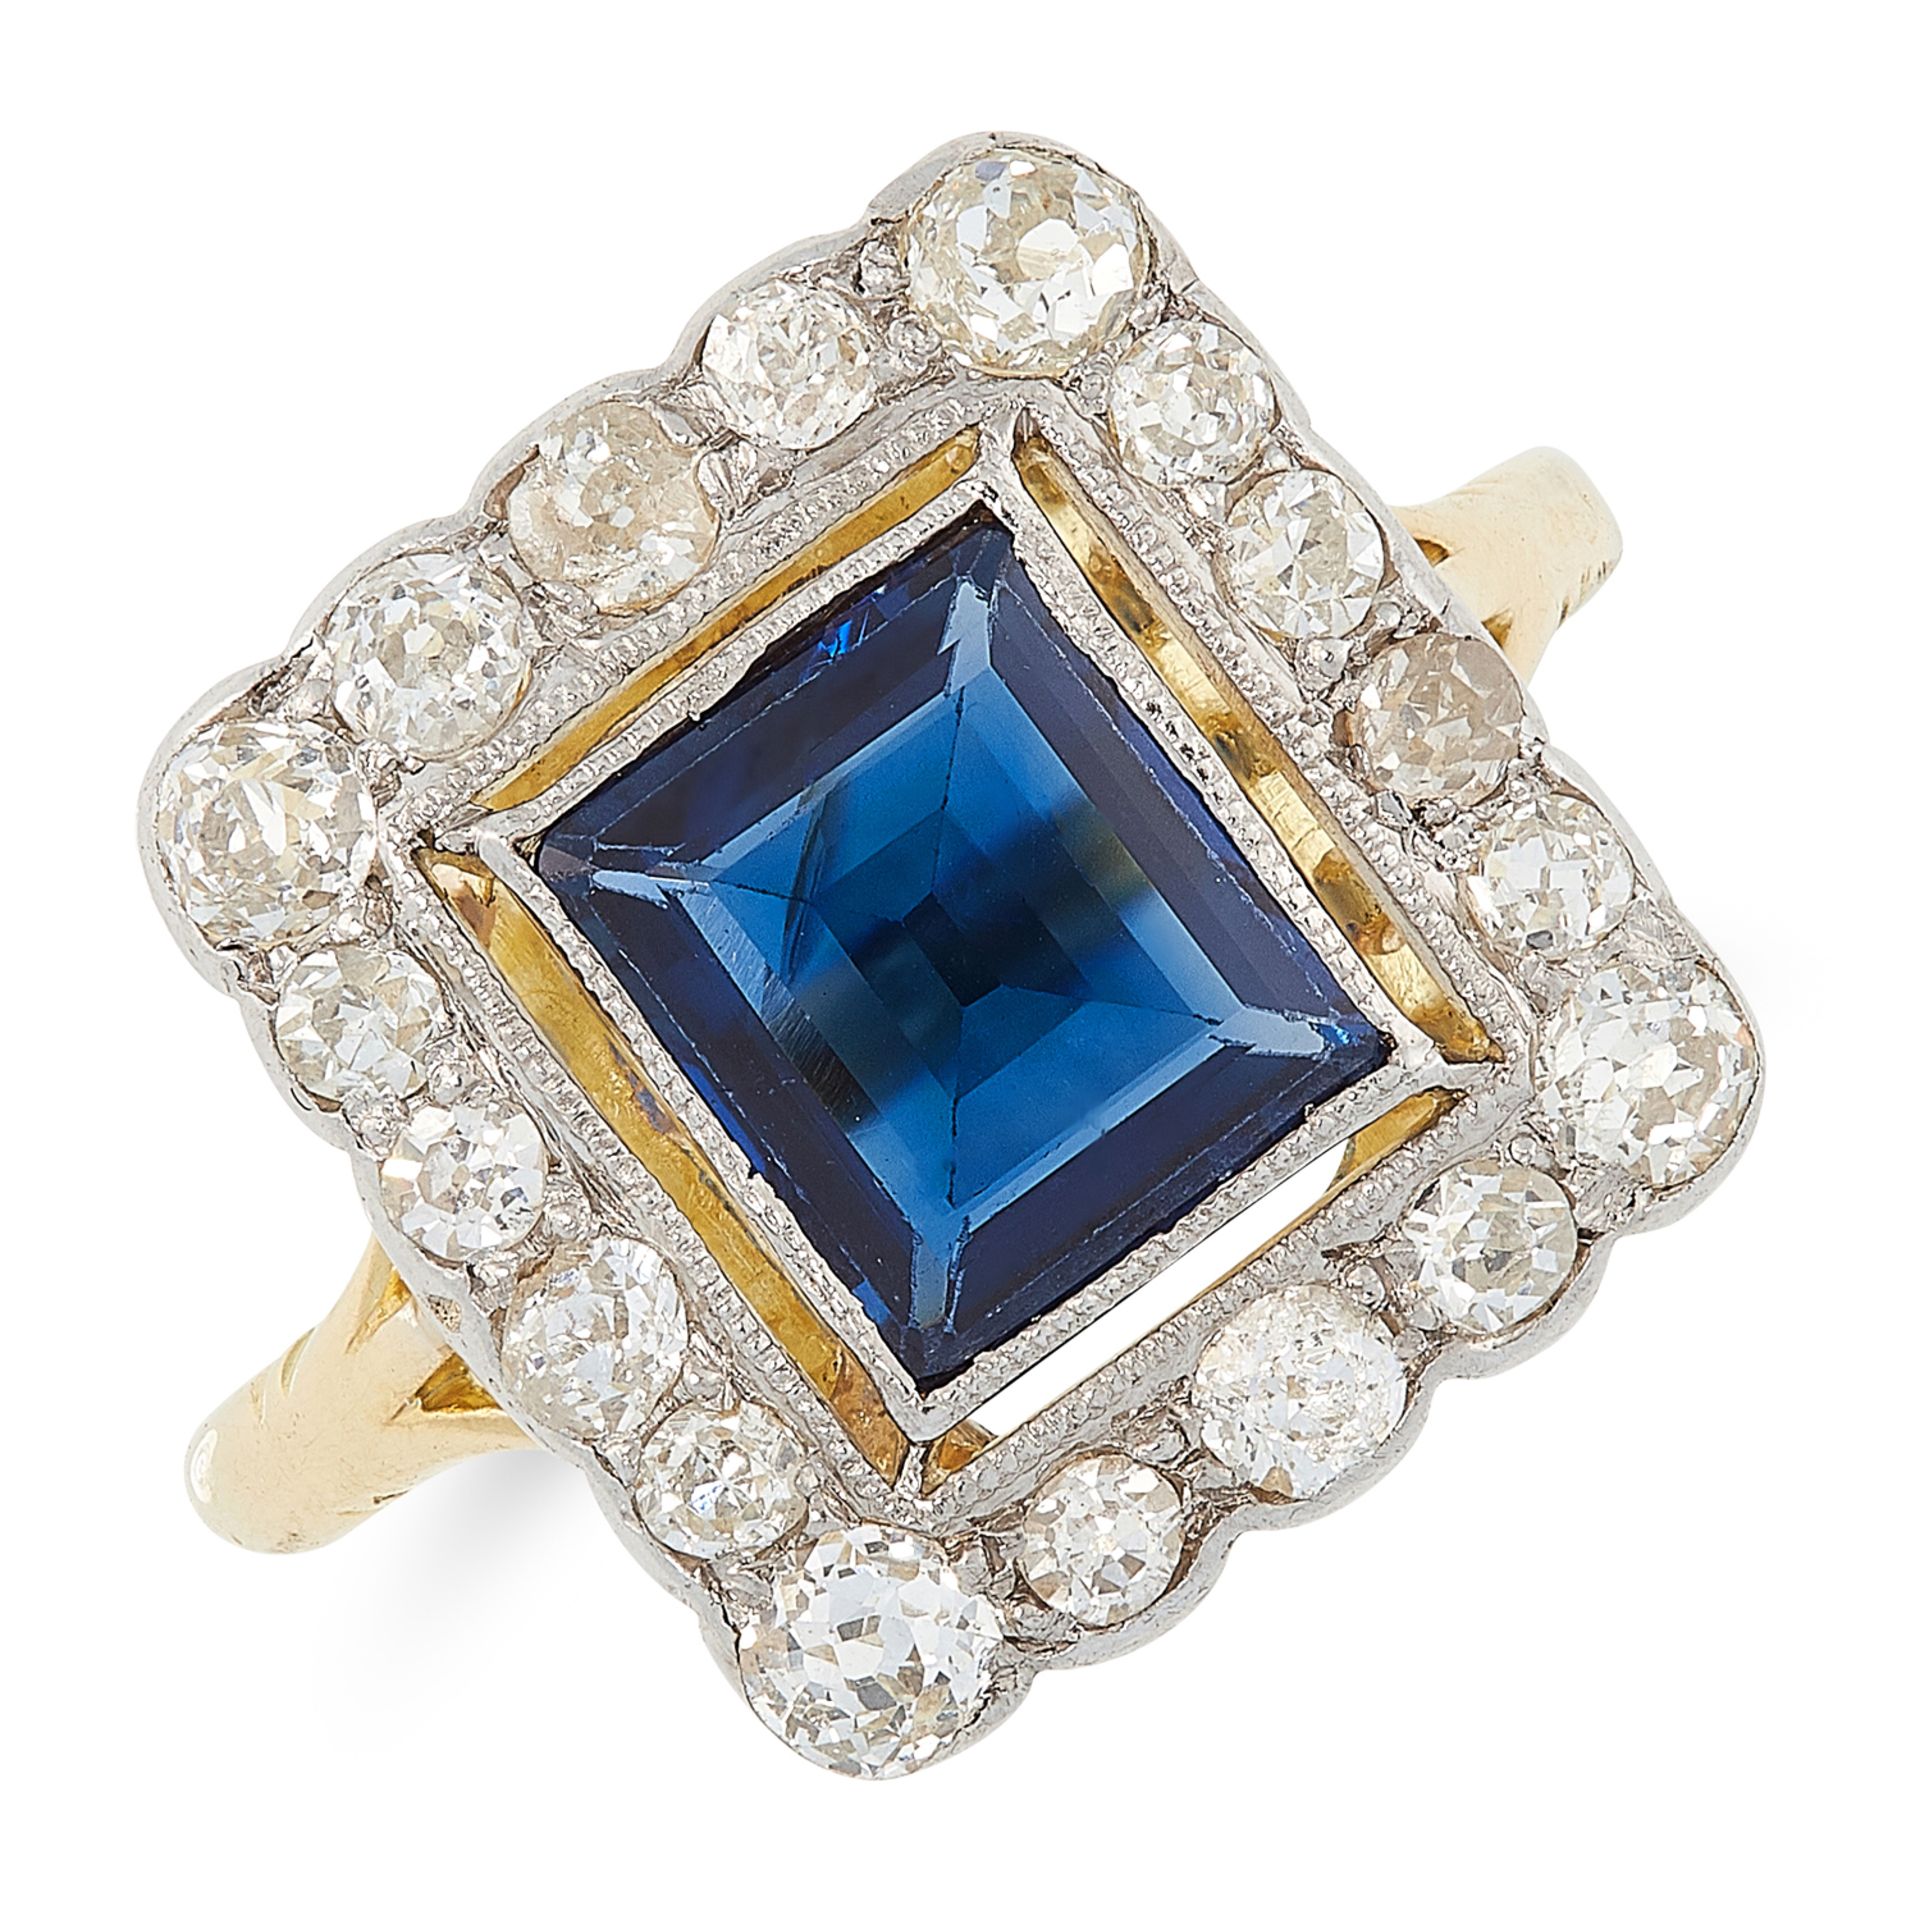 A SAPPHIRE AND DIAMOND DRESS RING CIRCA 1945 in 18ct yellow gold, set with a step cut sapphire of